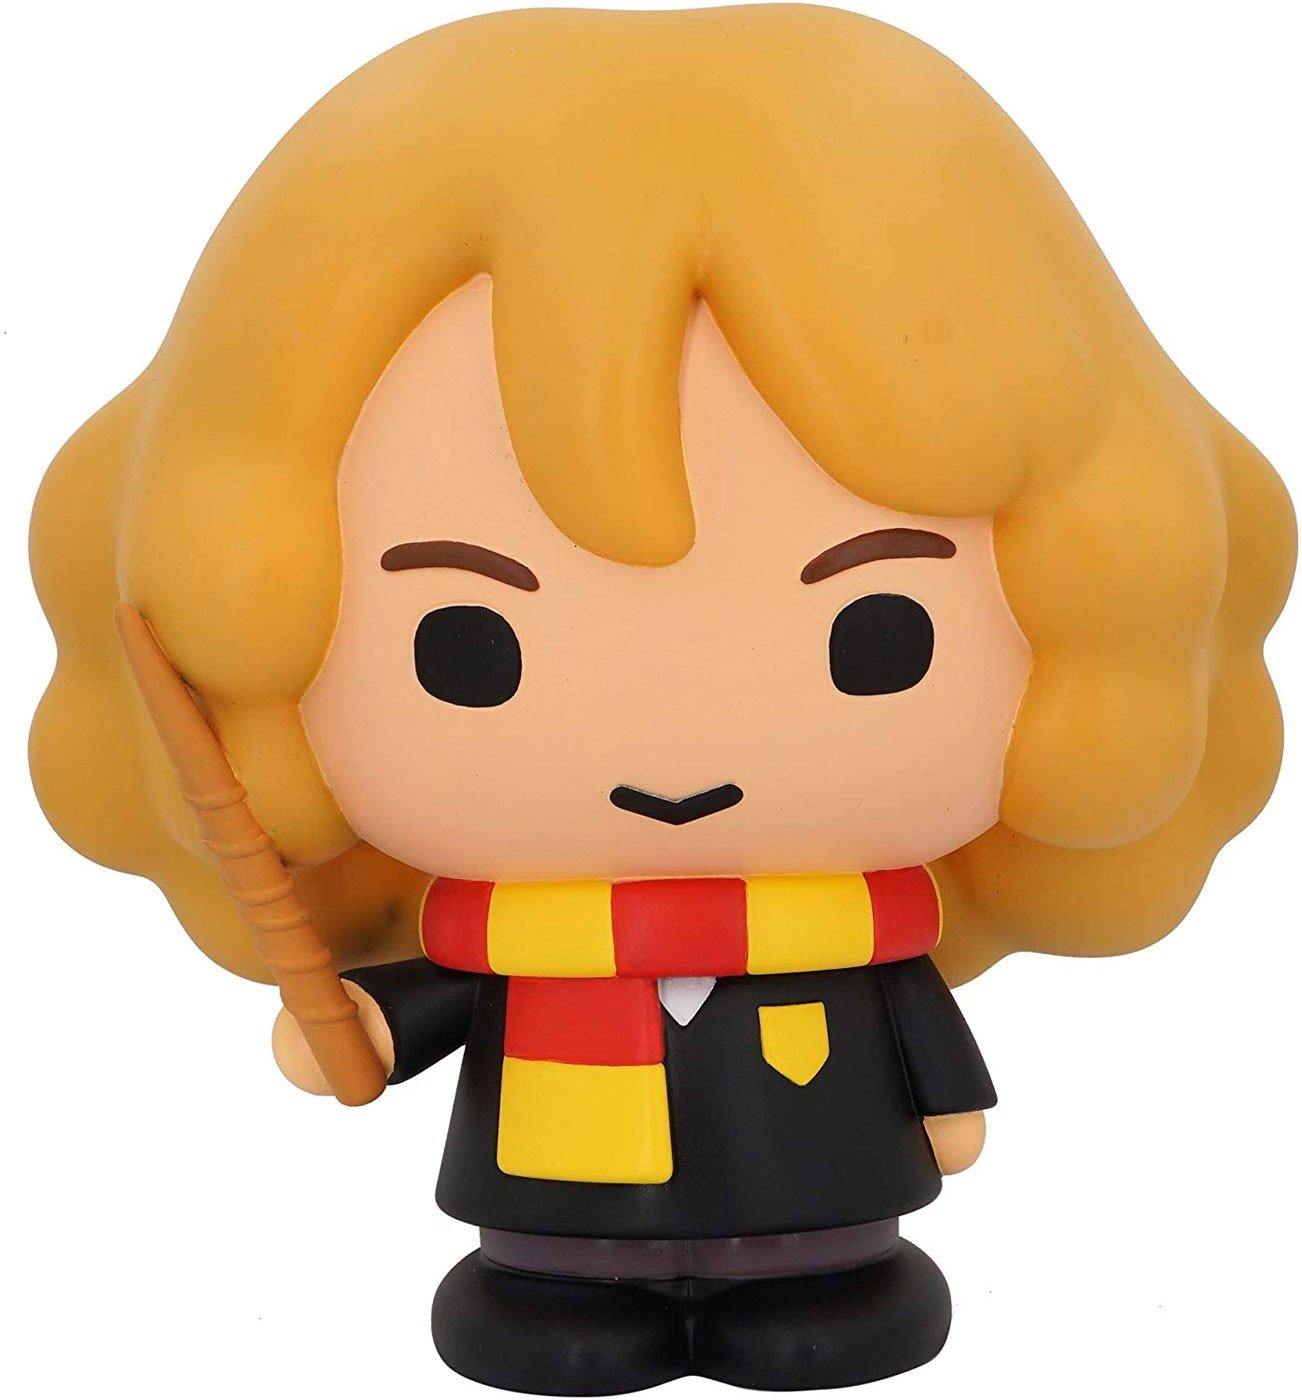 Harry Potter Hermione Figural Bank